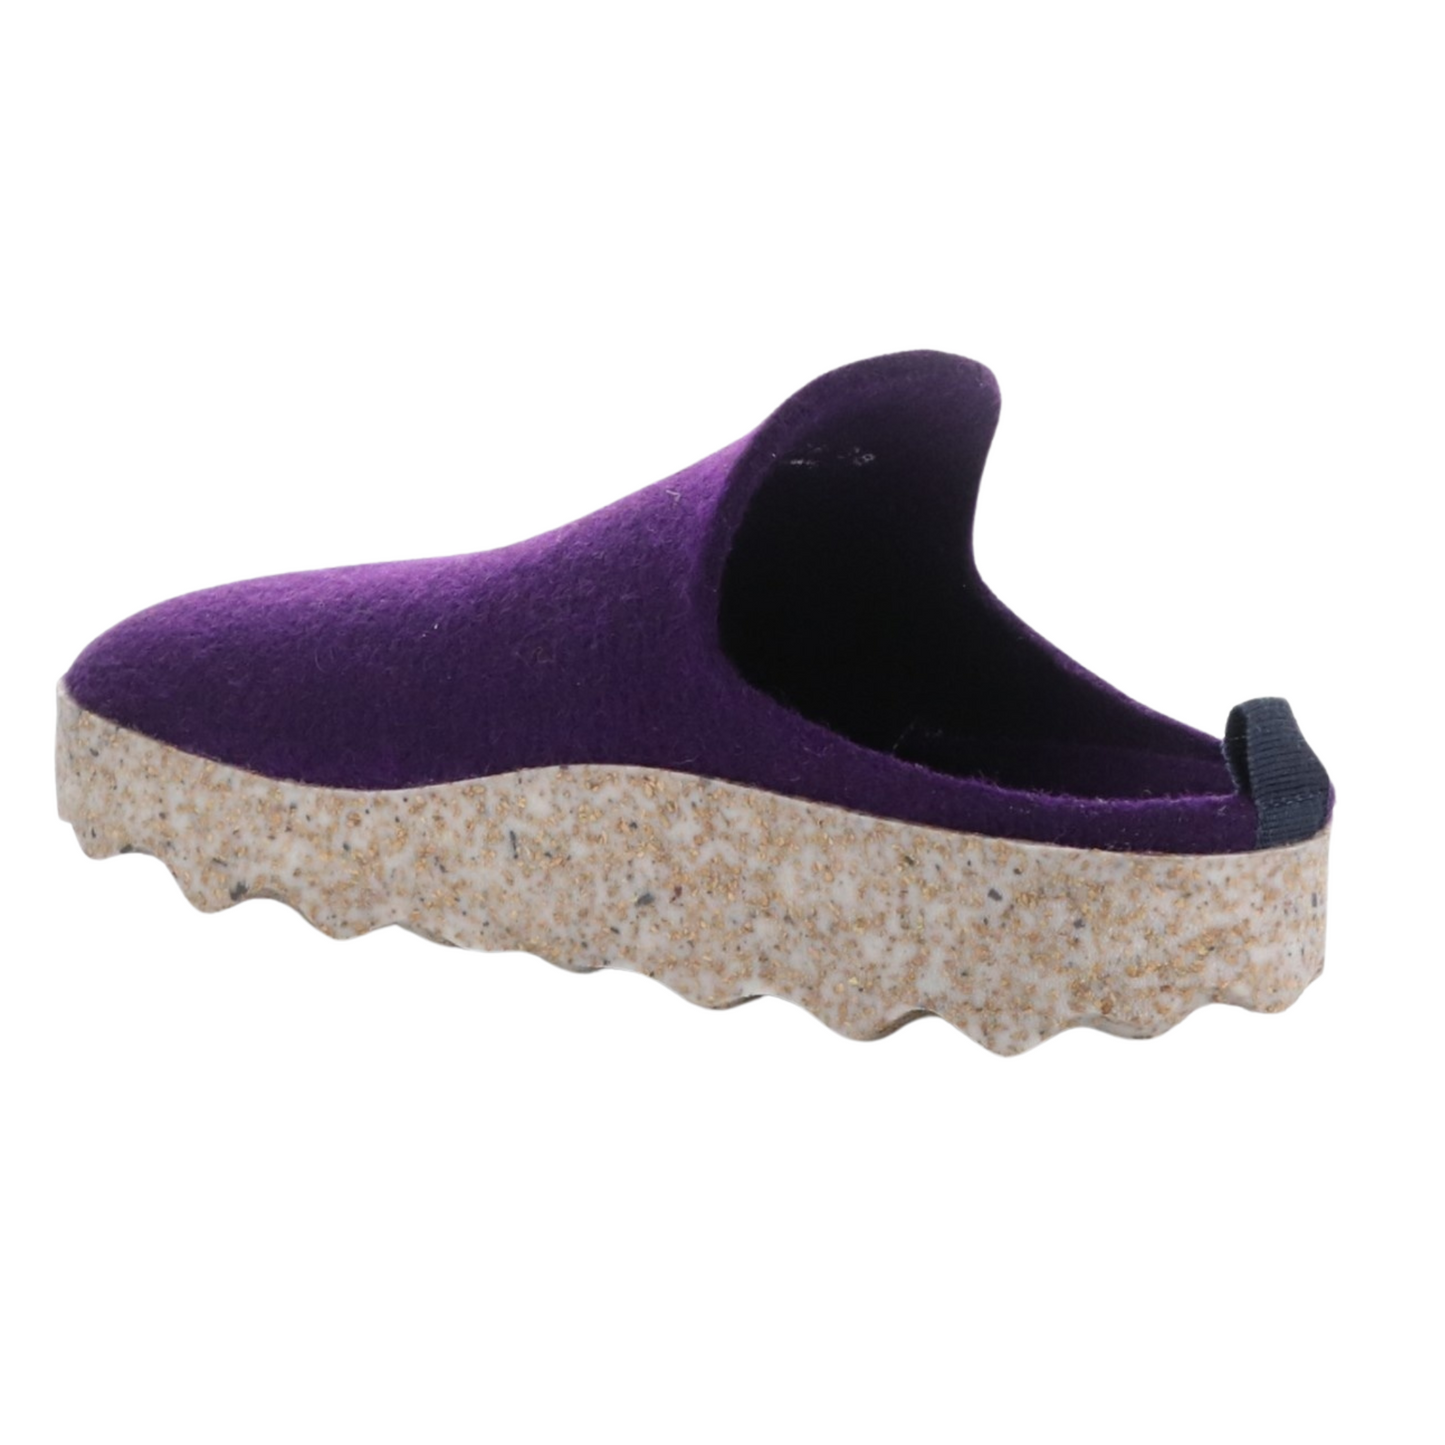 A purple felted shoe is pictured from a back angle showing a small heel tab on the backless heel. A thick waffle textured tread is made of a mix of white and honey coloured speckled material.